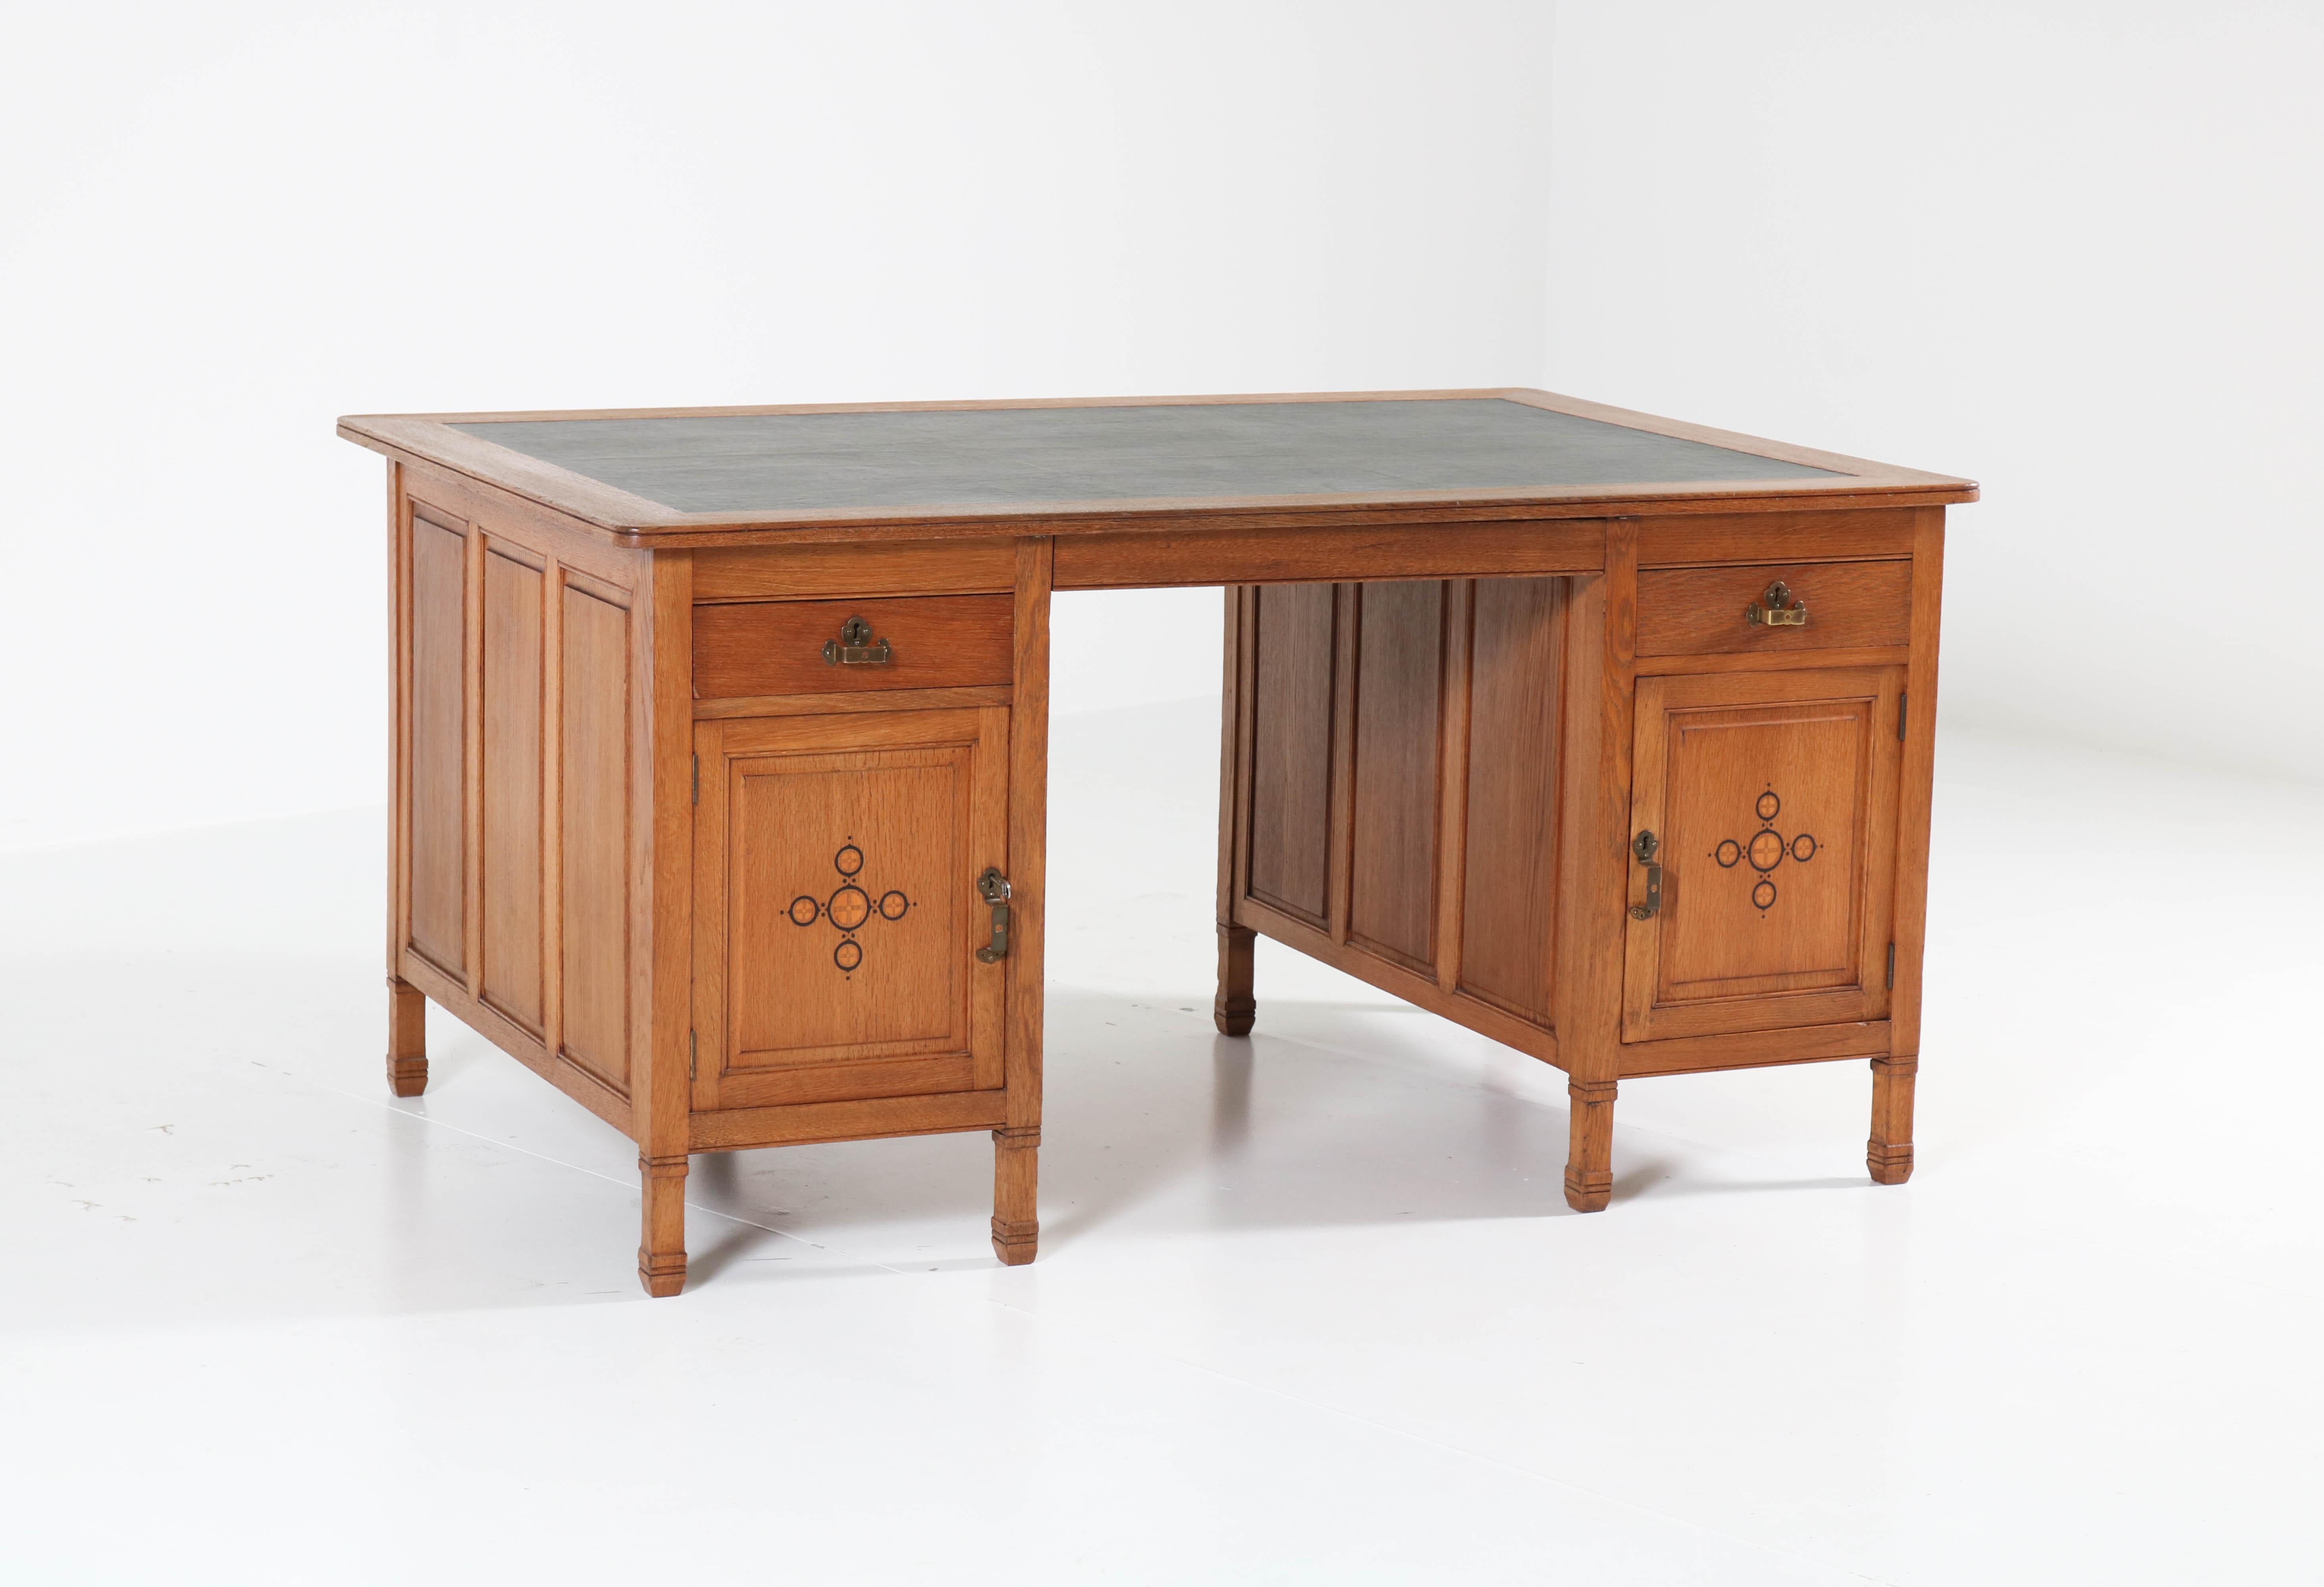 Elegant and rare Art Nouveau Arts & Crafts partners desk.
Design by K.P.C. de Bazel.
Striking Dutch design from the 1900s.
Solid oak with original brass handles and inlay.
In good original condition with minor wear consistent with age and